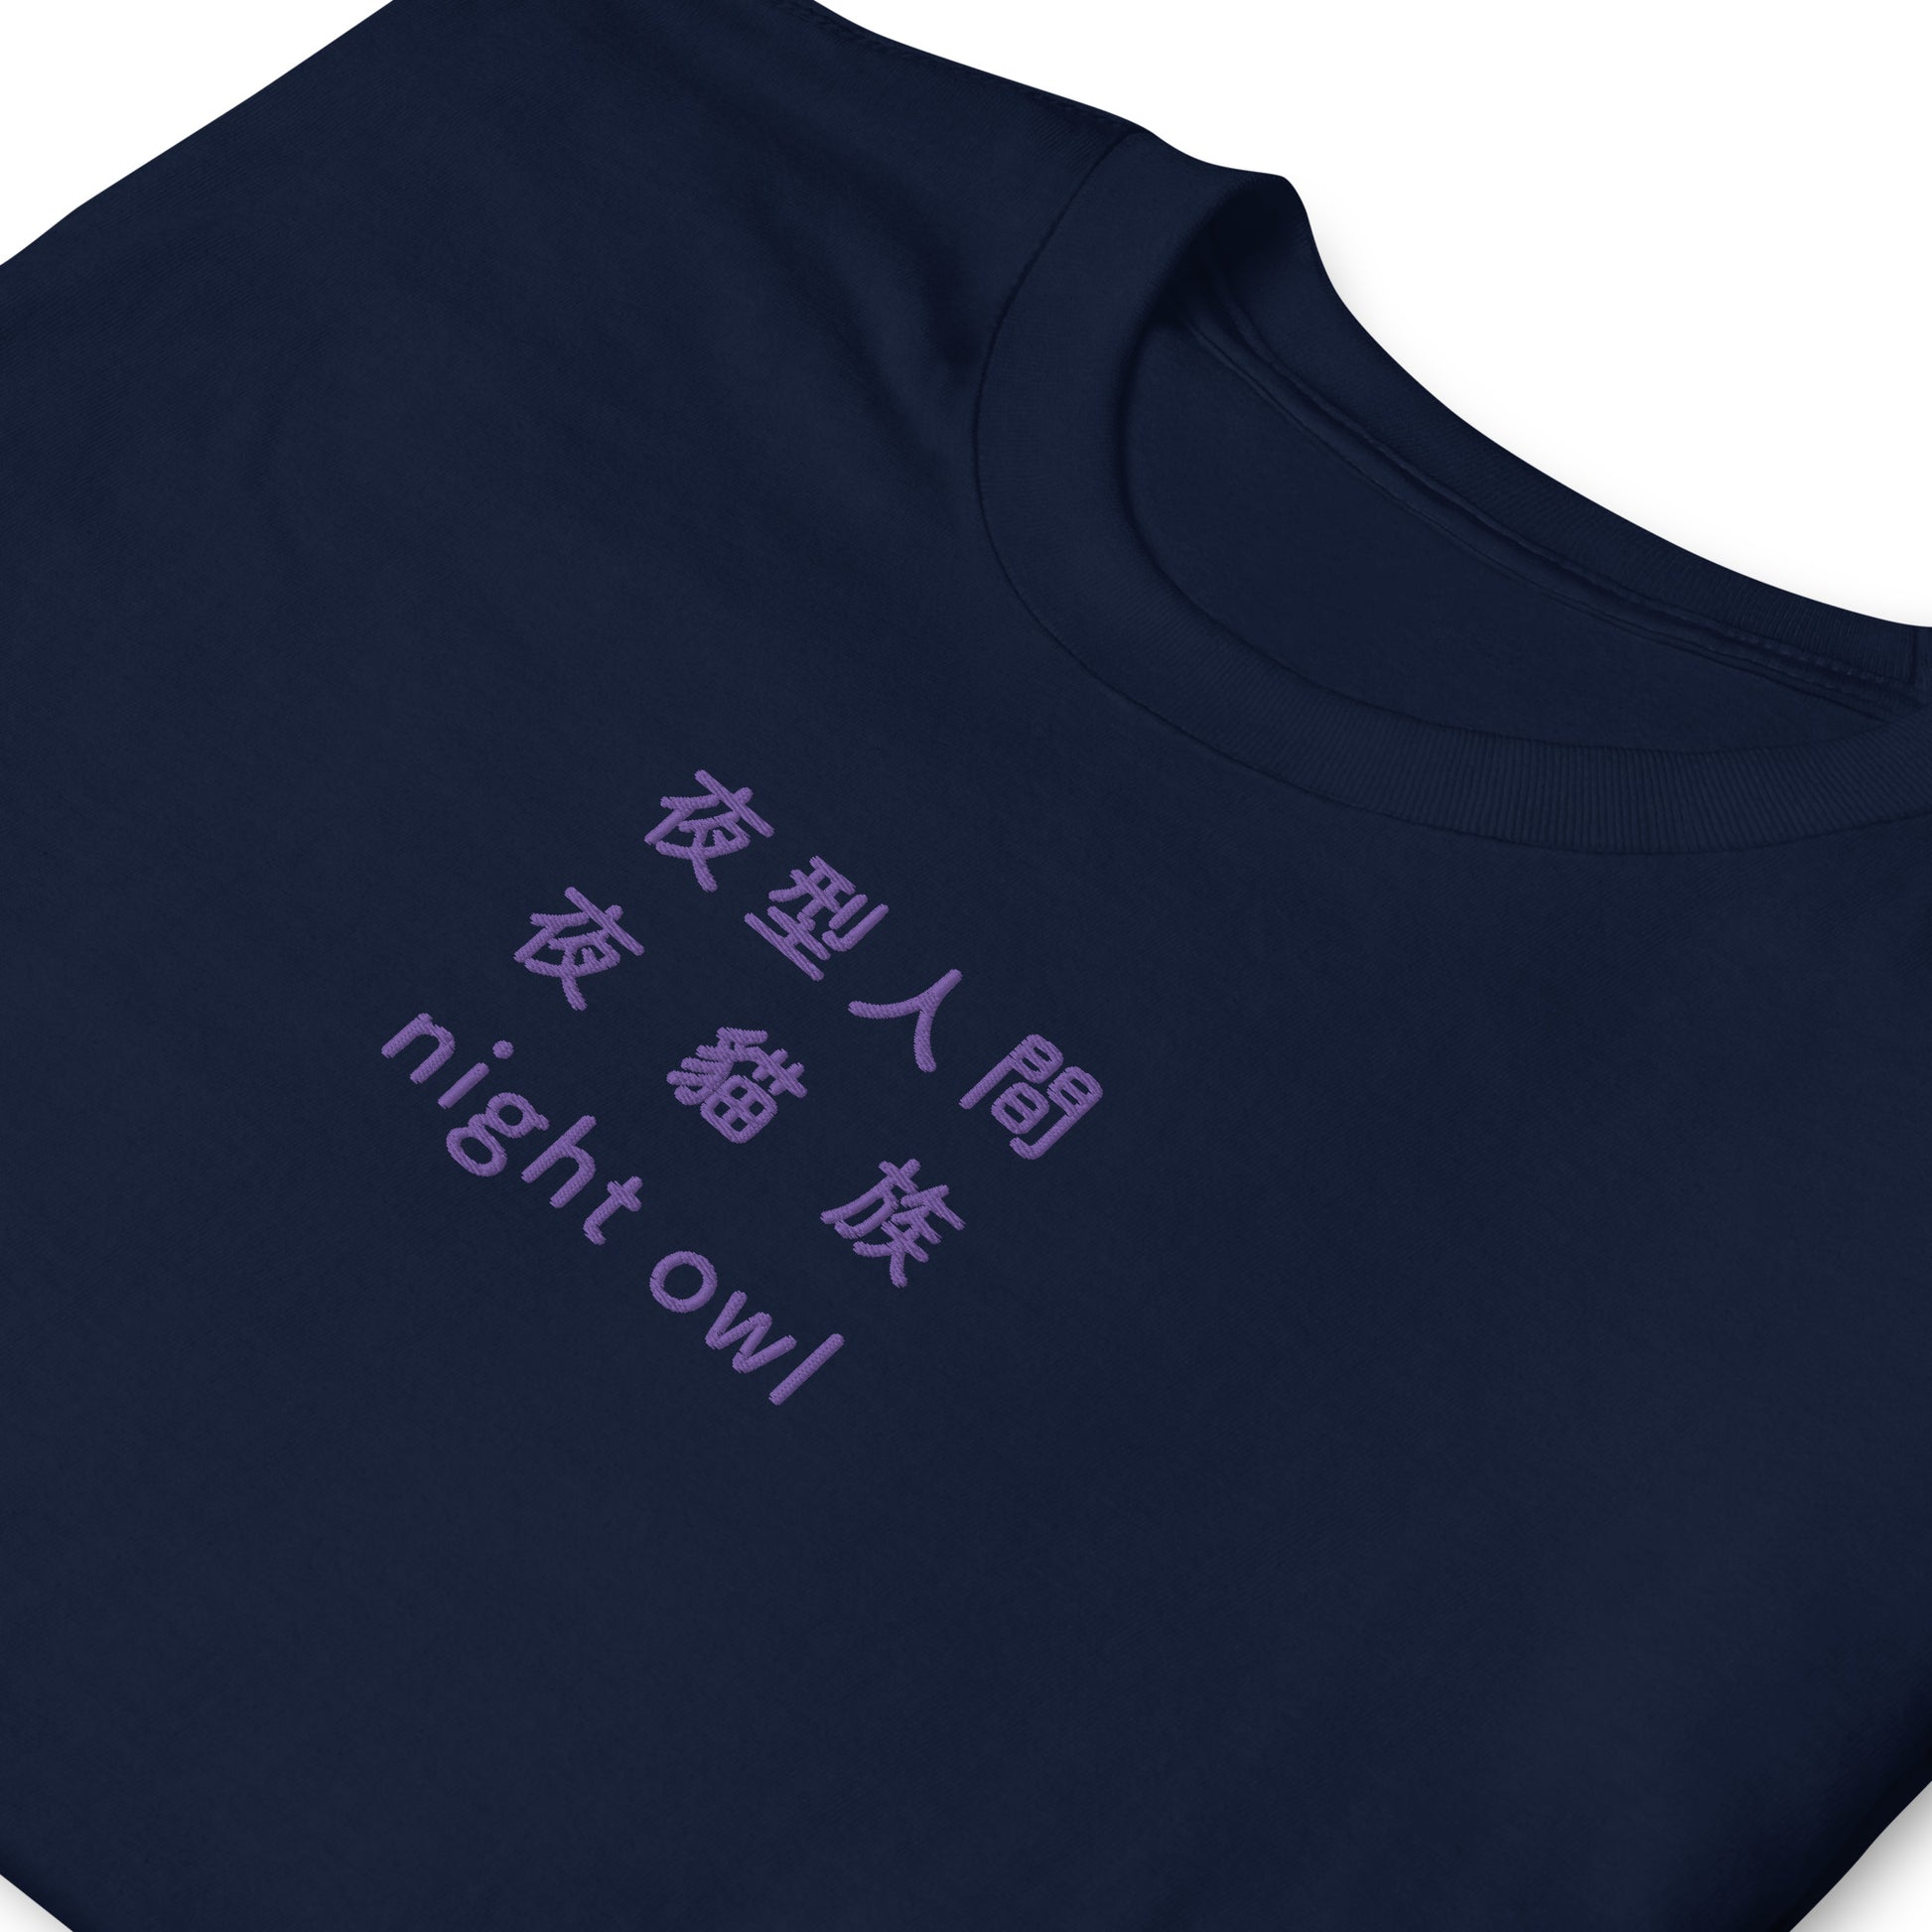 Navy High Quality Tee - Front Design with an Purple Embroidery "Night Owl" in Japanese,Chinese and English